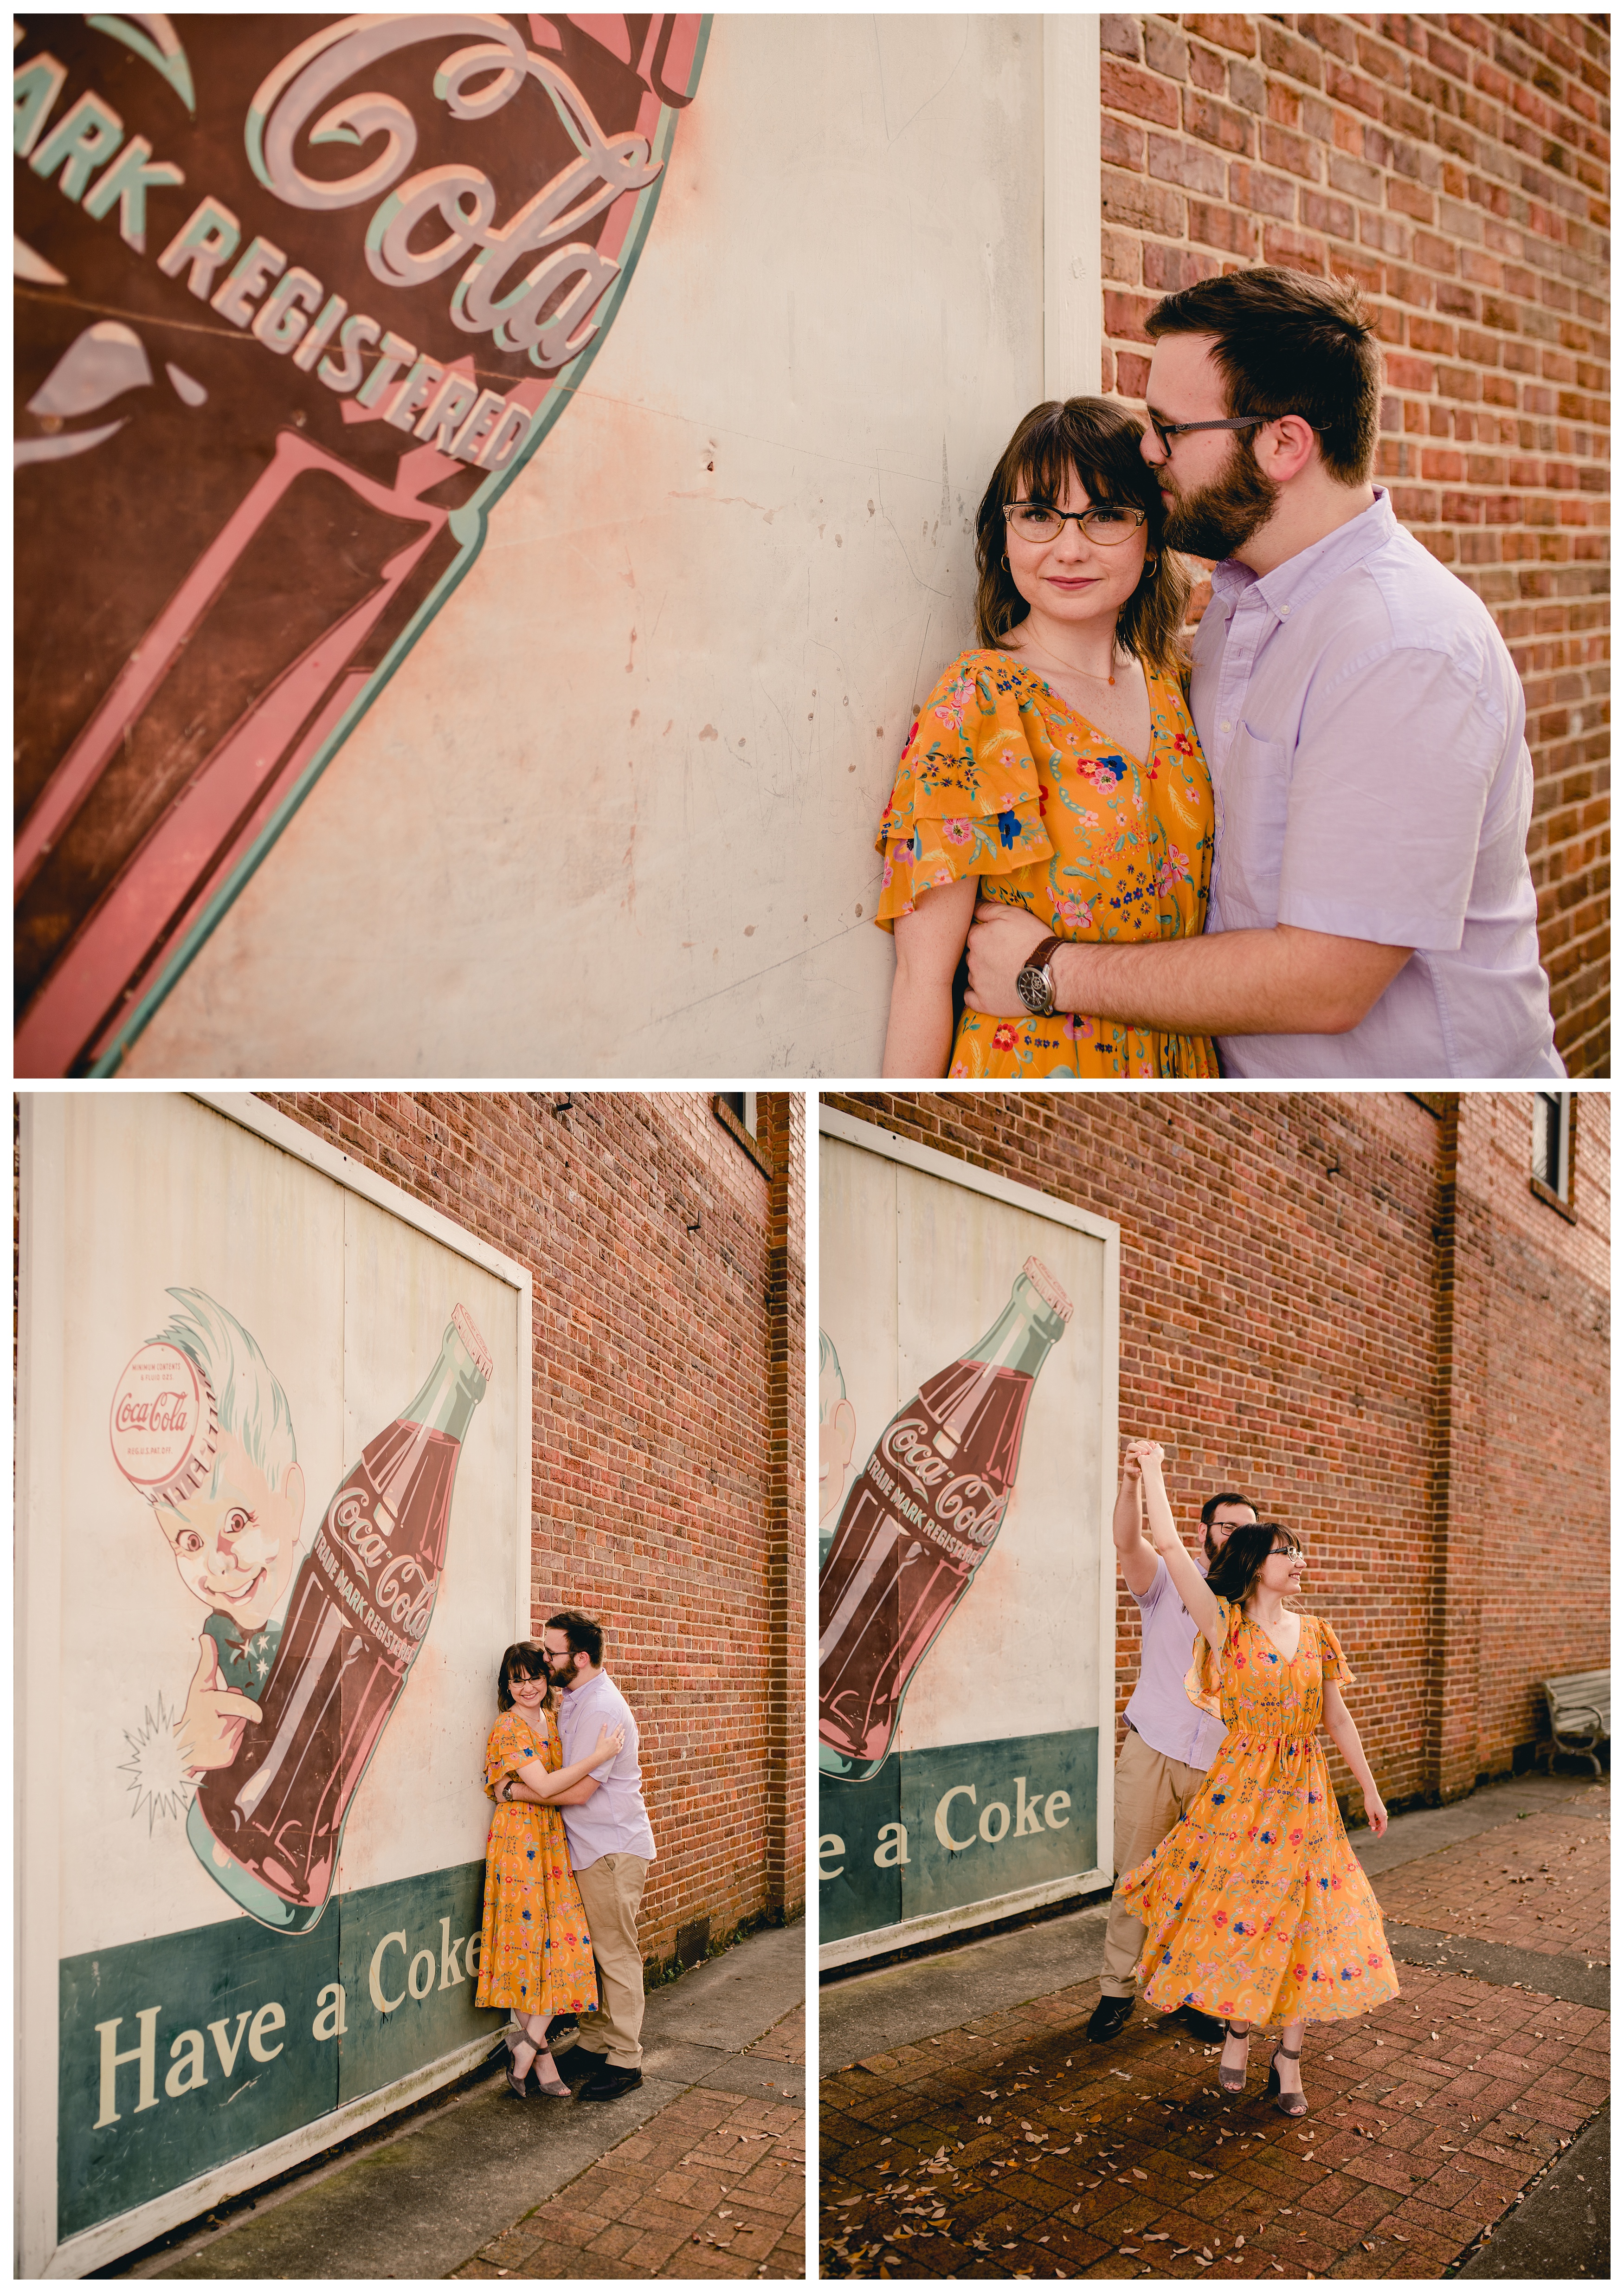 Fun engagement session in North Florida by Coca Cola vintage sign. Shelly Williams Photography